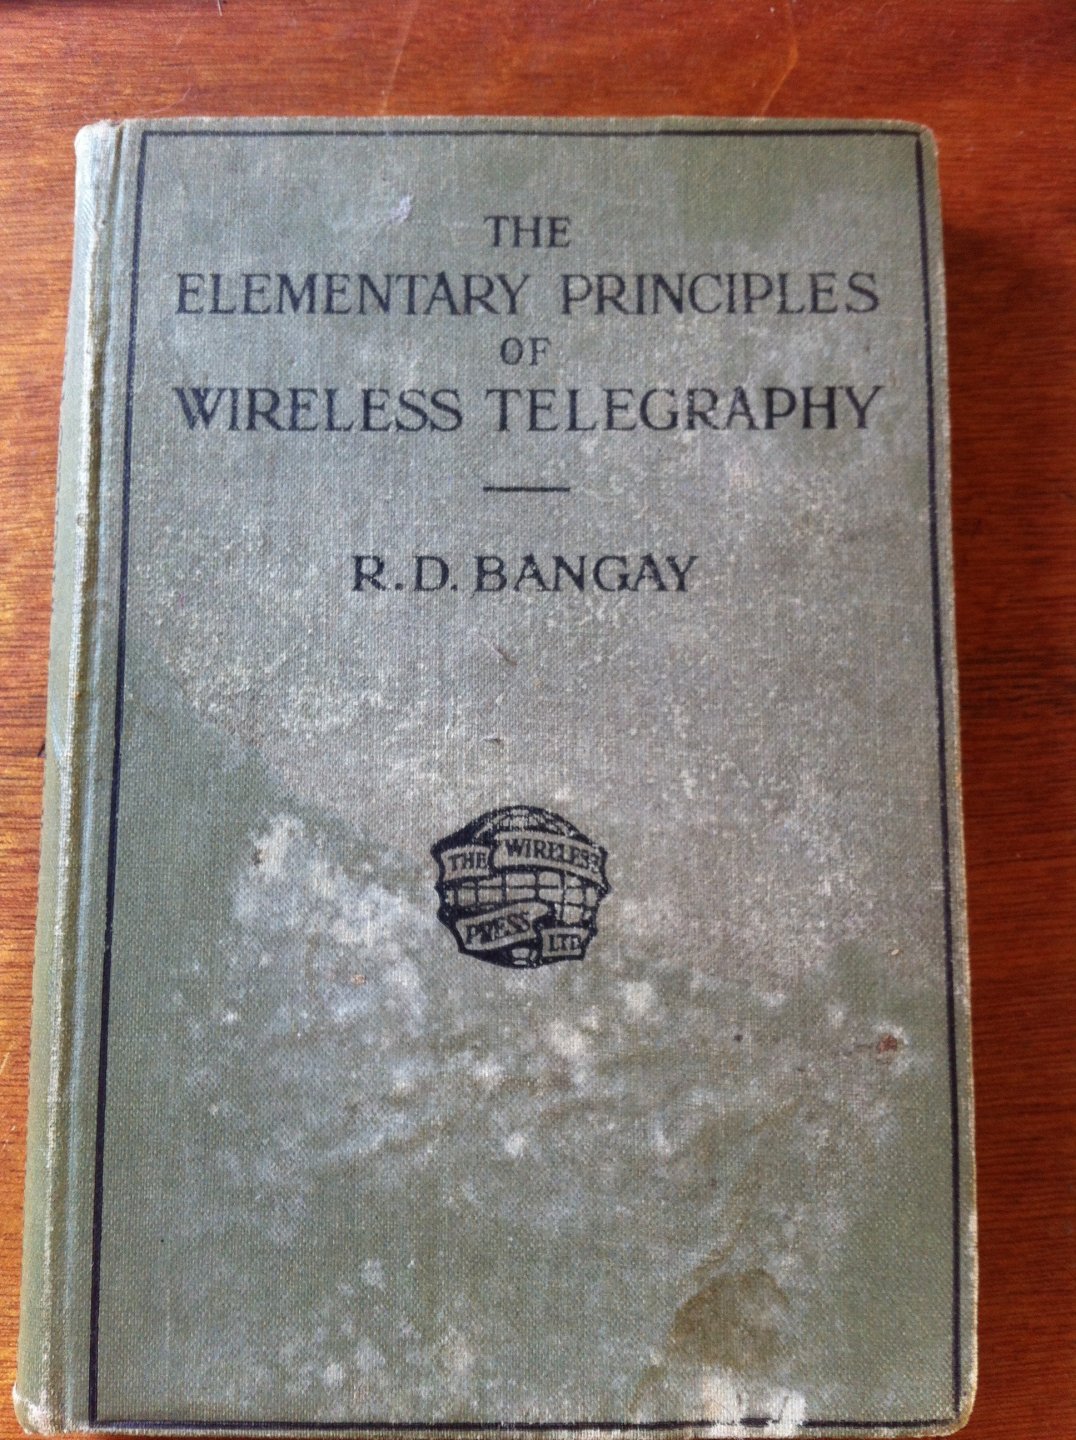 Bangay, R.D. - The elementary principles of wireless telegraphy part 1